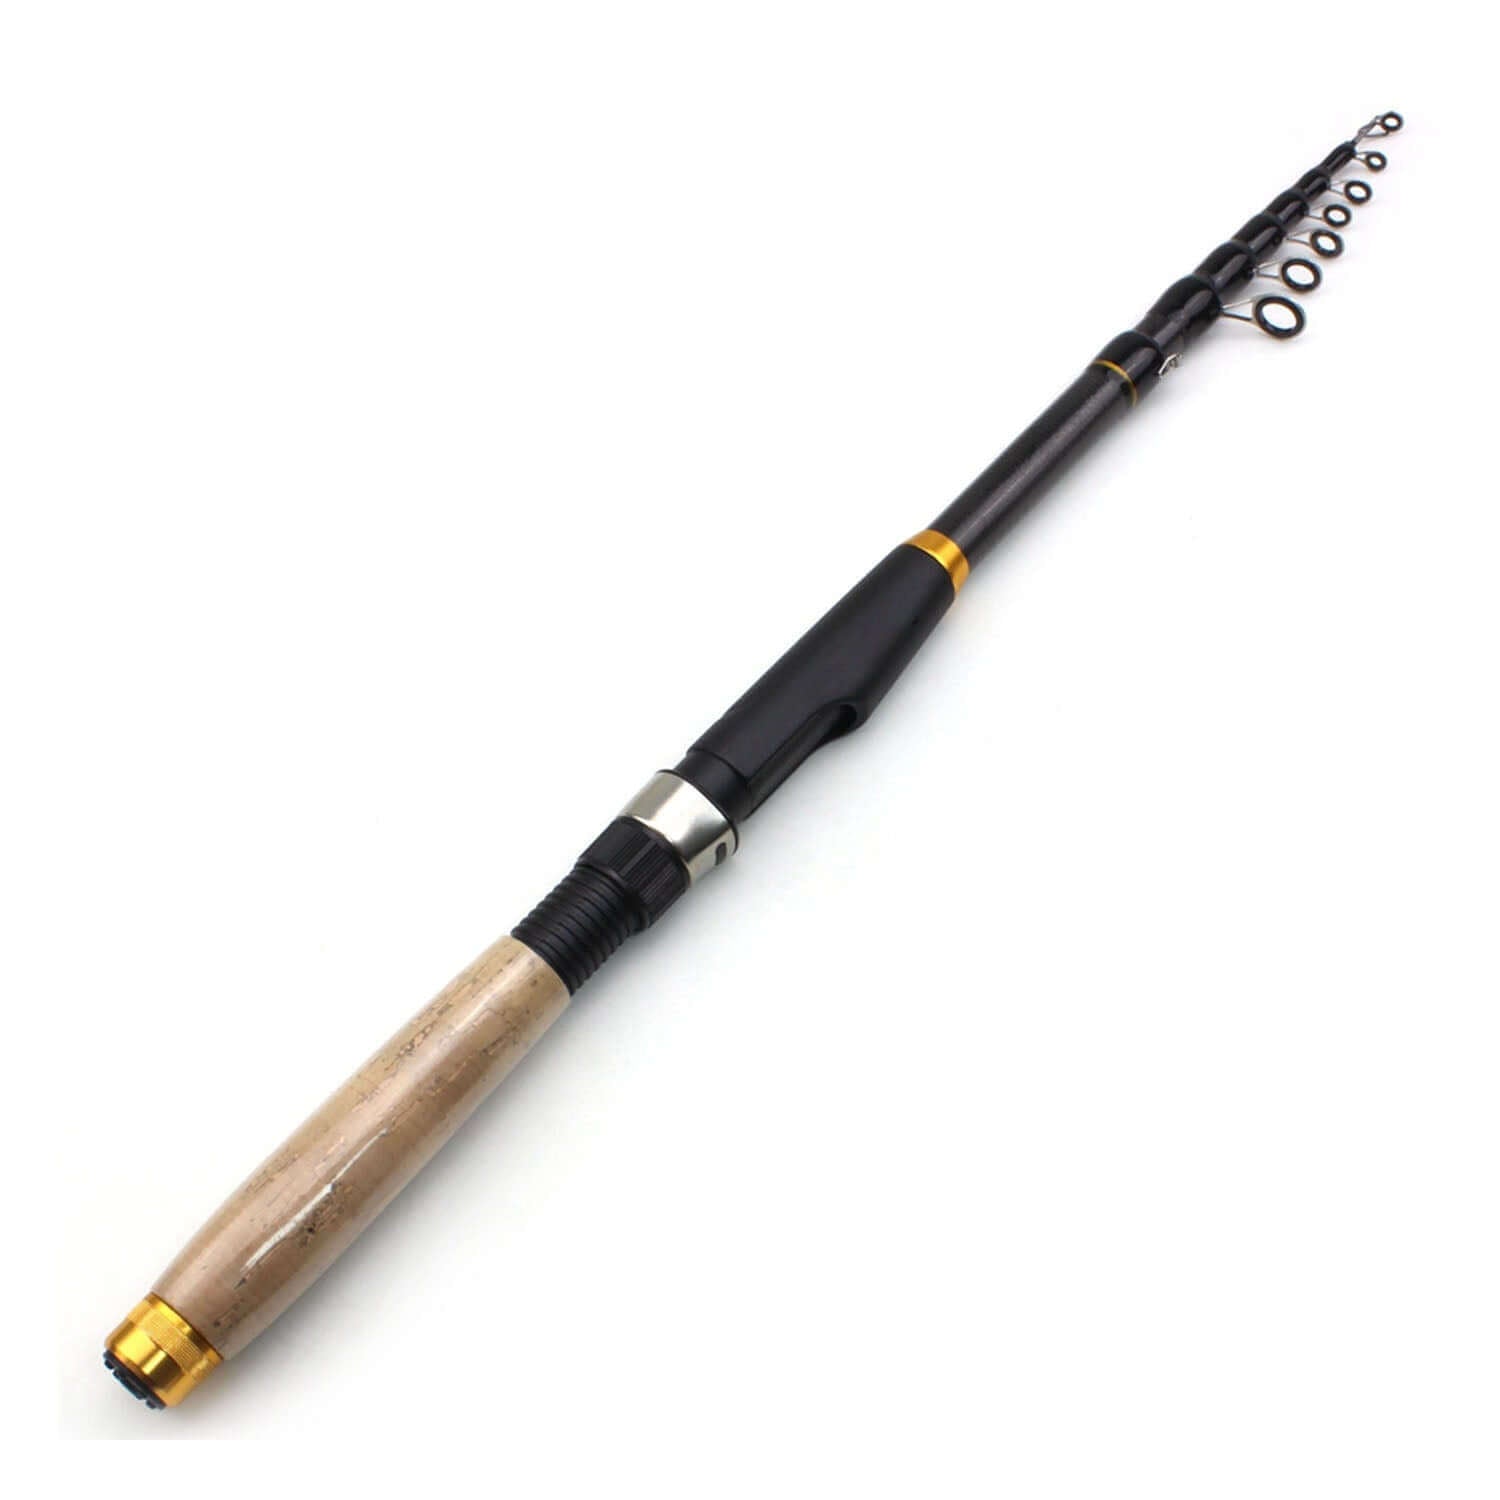 The Best Travel Fishing Rod? 